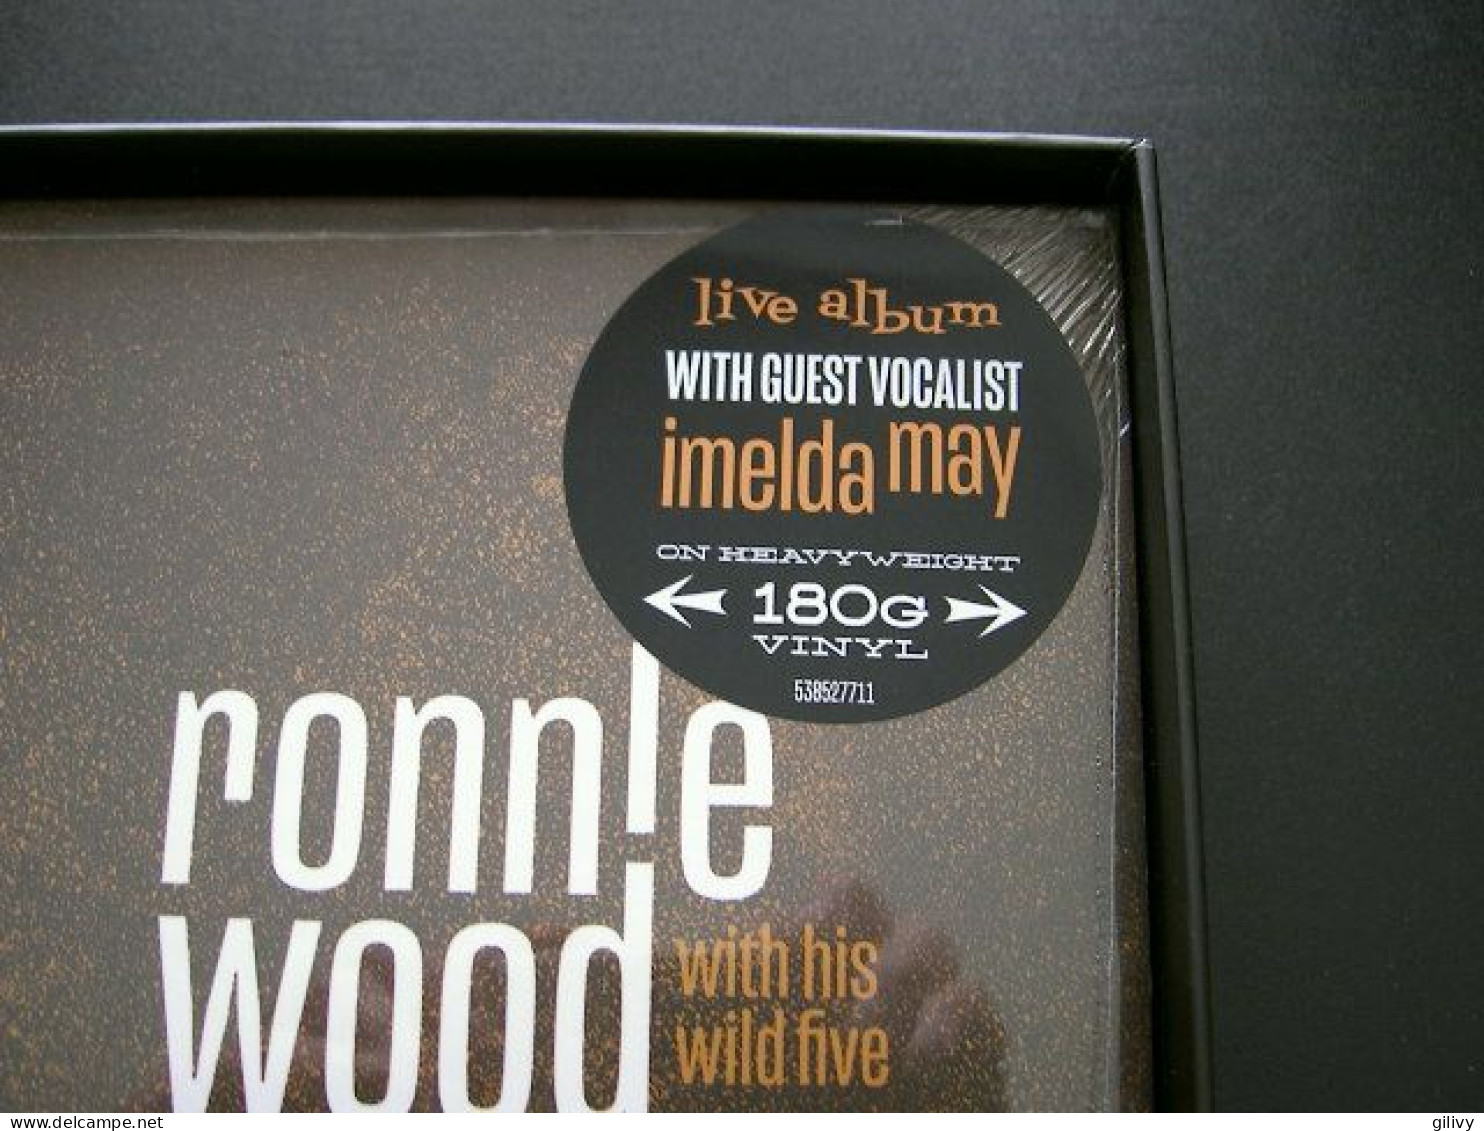 Coffret Vinyle / Cd -  RONNIE WOOD : " Mad Lad "  - Deluxe Edition - Formati Speciali